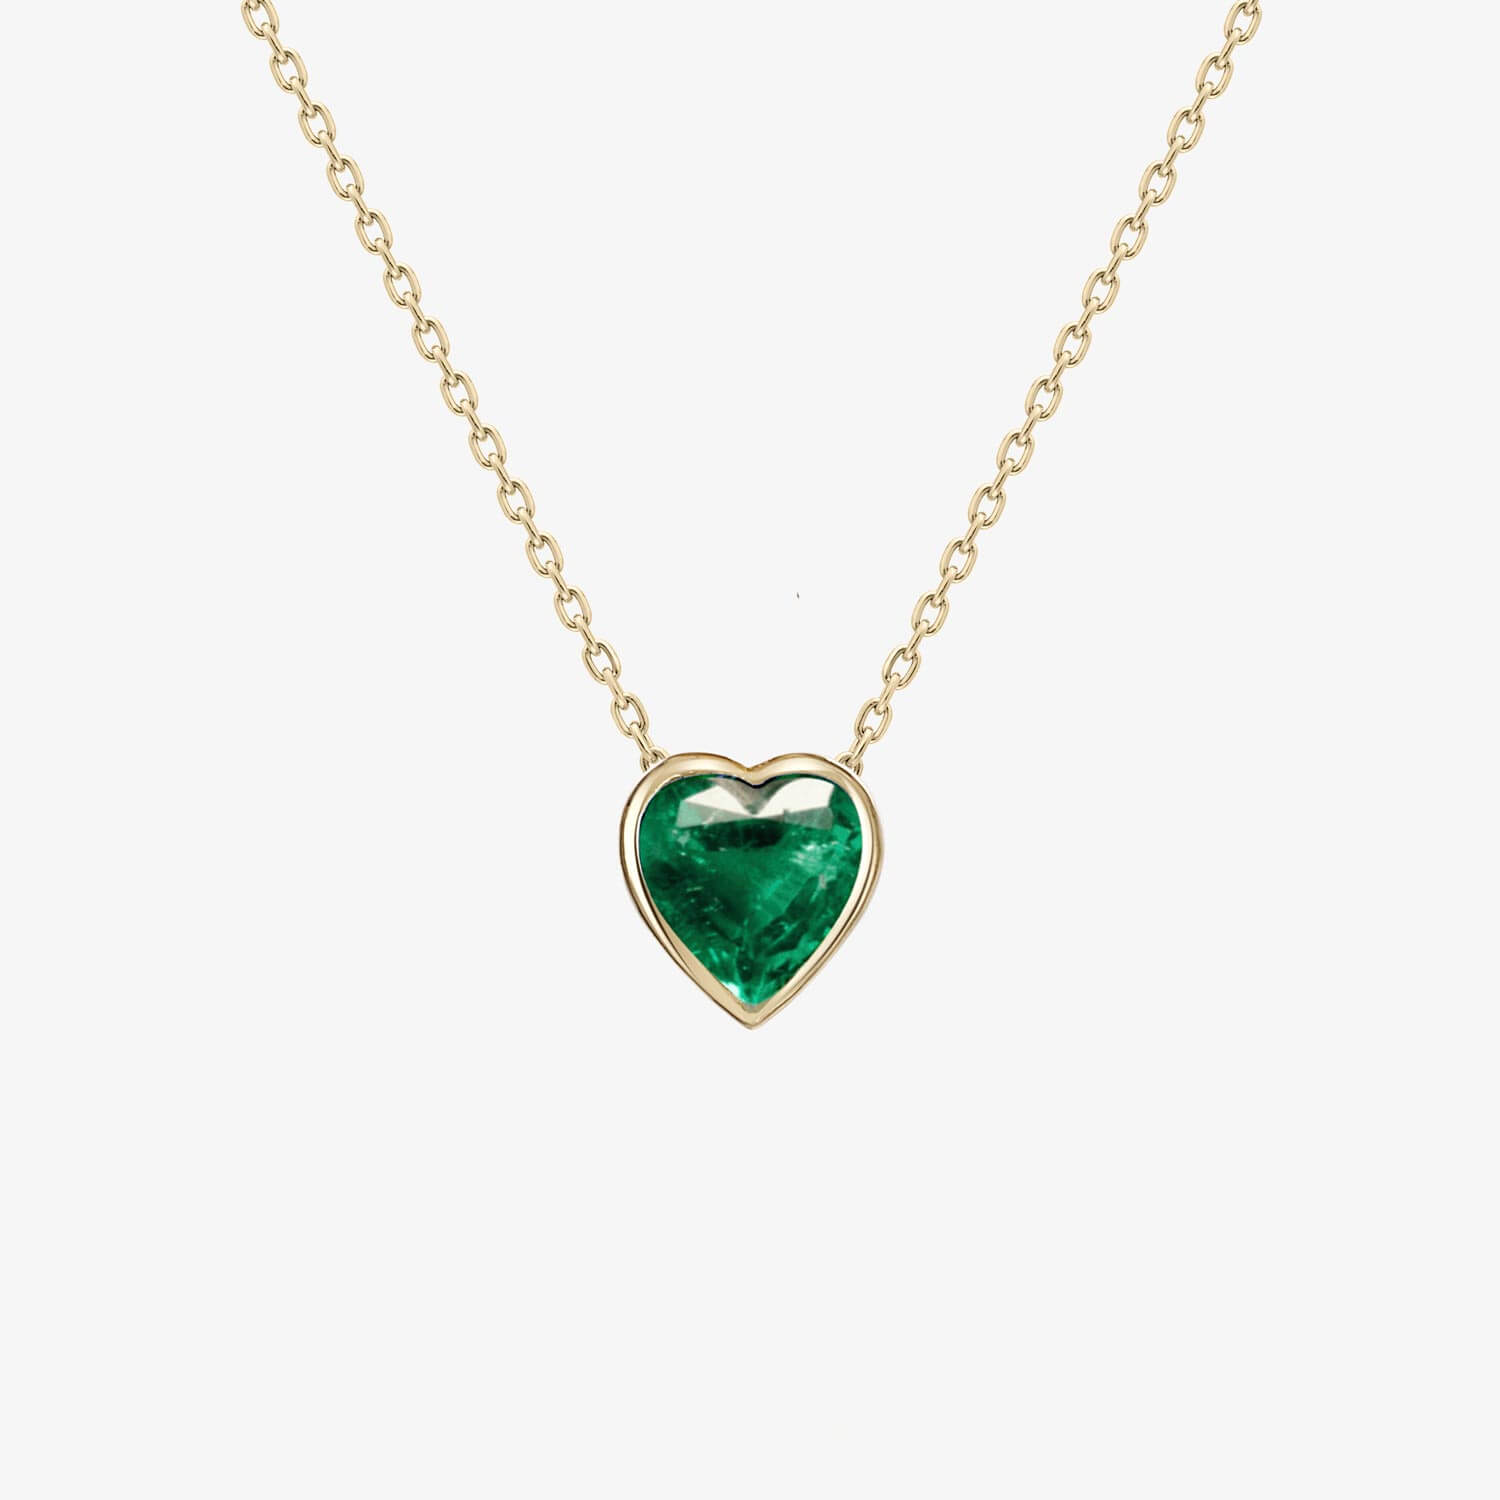 Heart Shaped Emerald Necklace